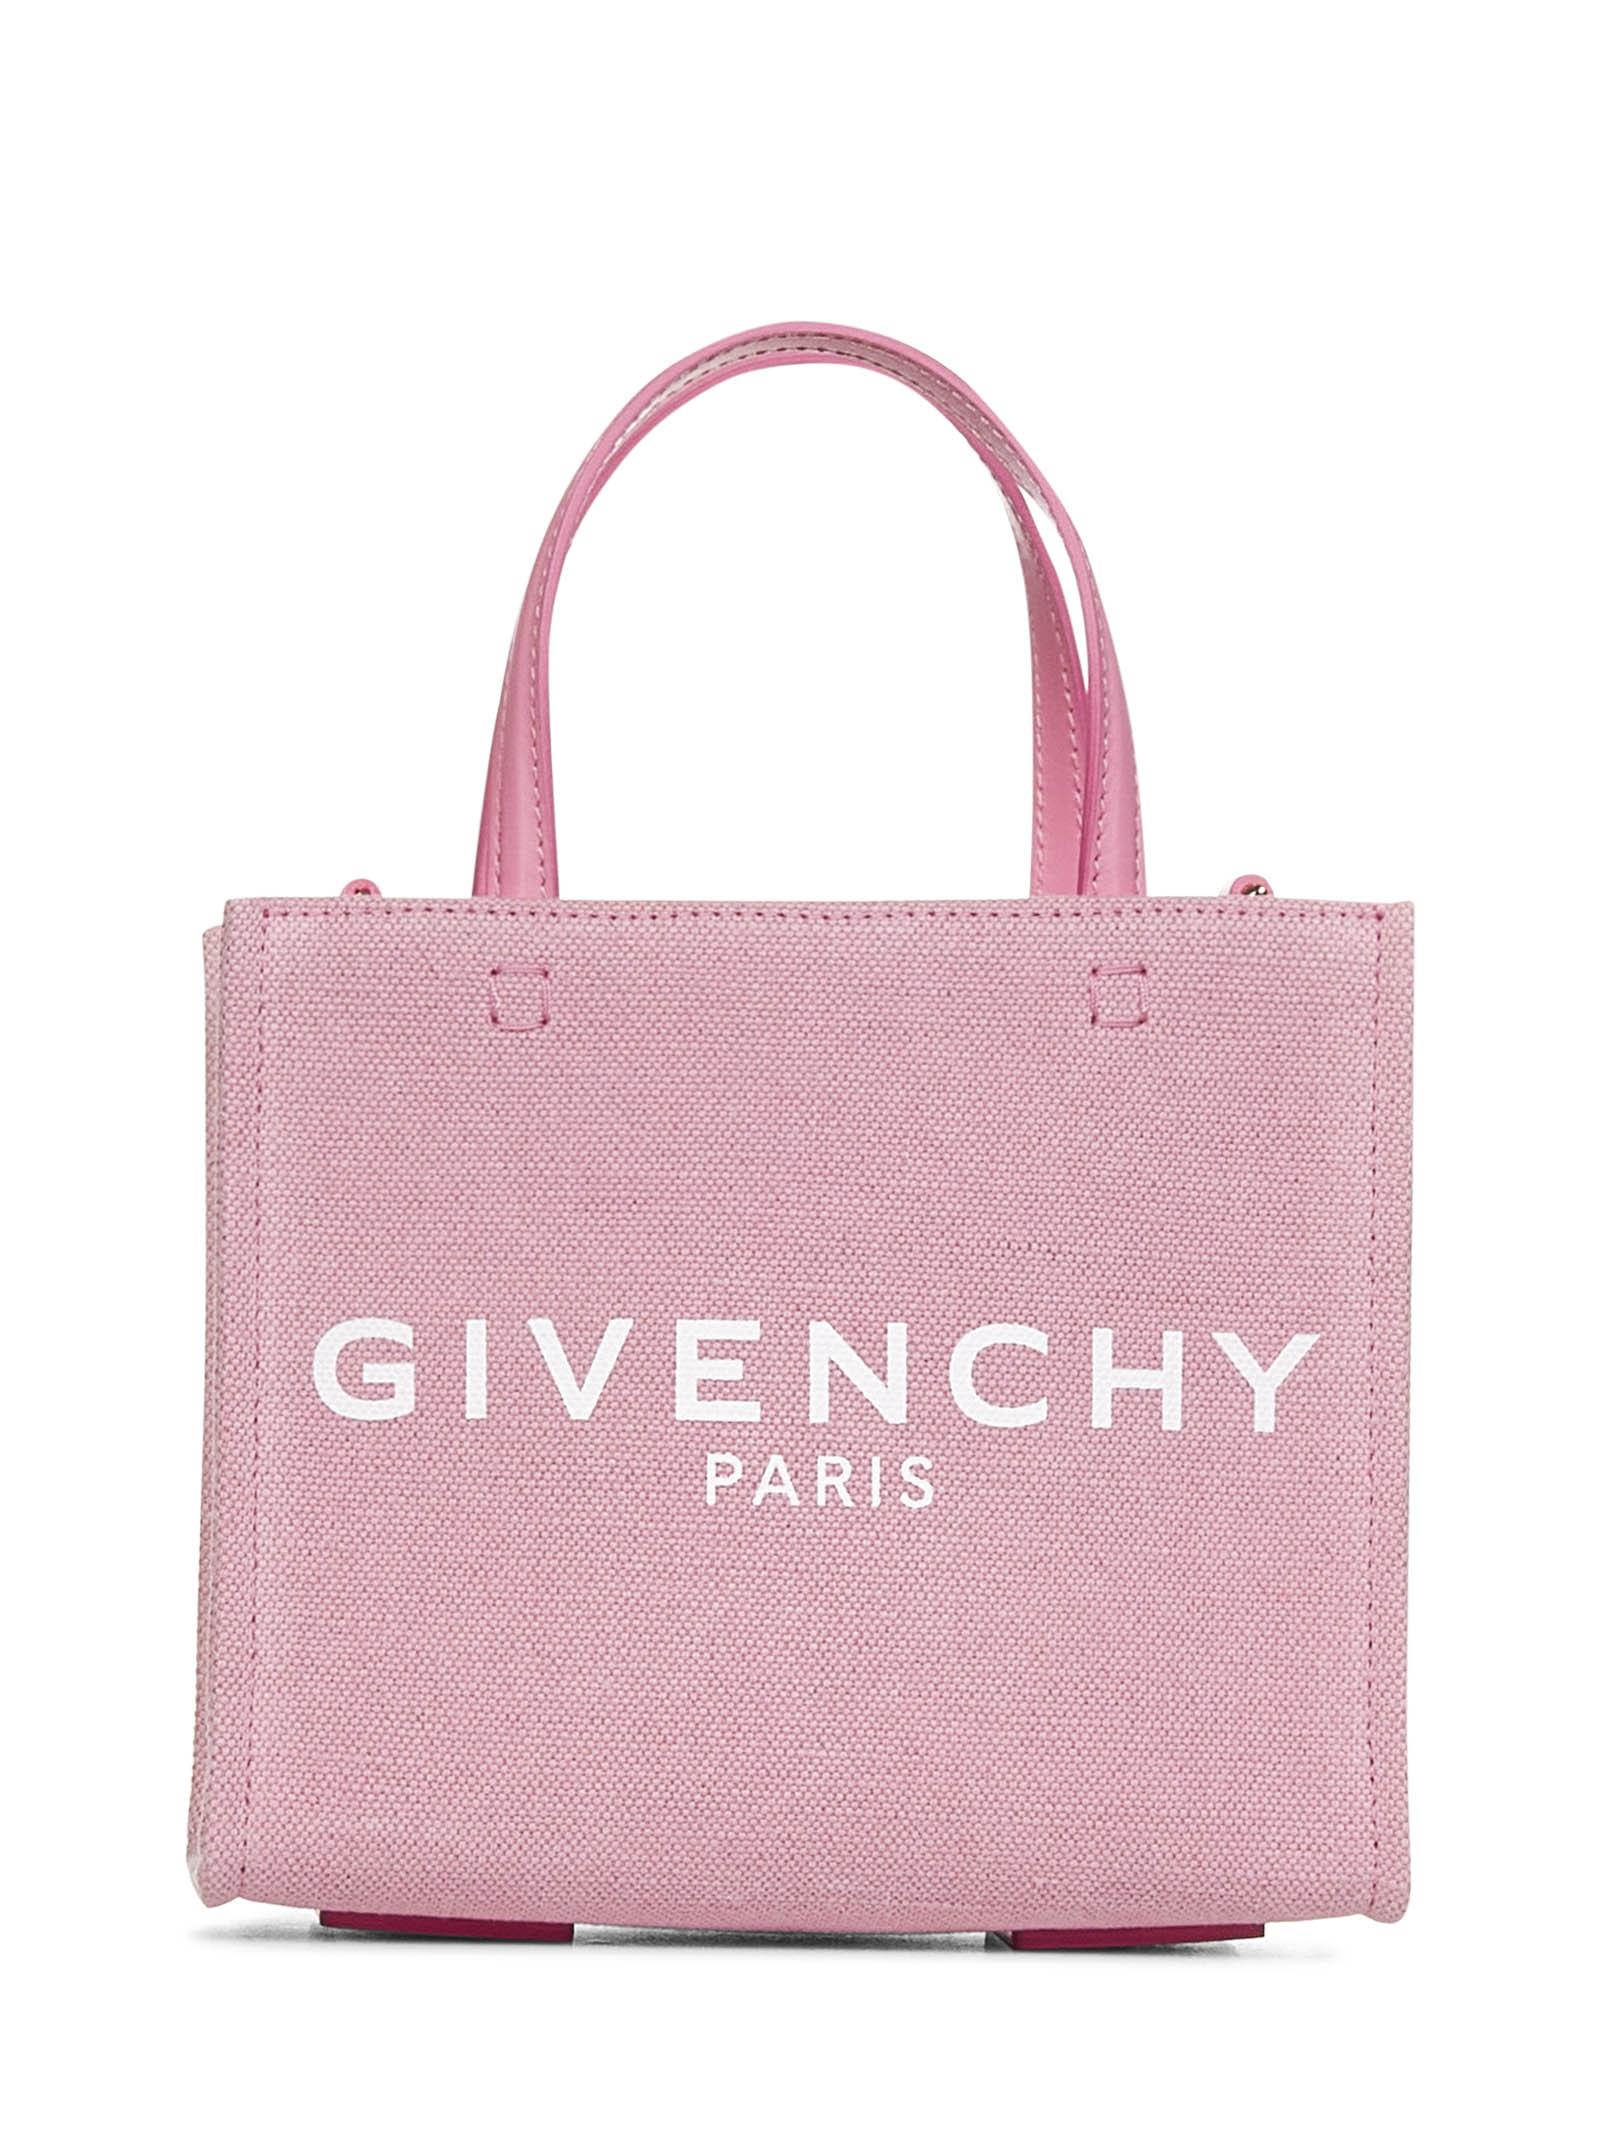 Givenchy Mini G Tote Handbag in Pink | Lyst